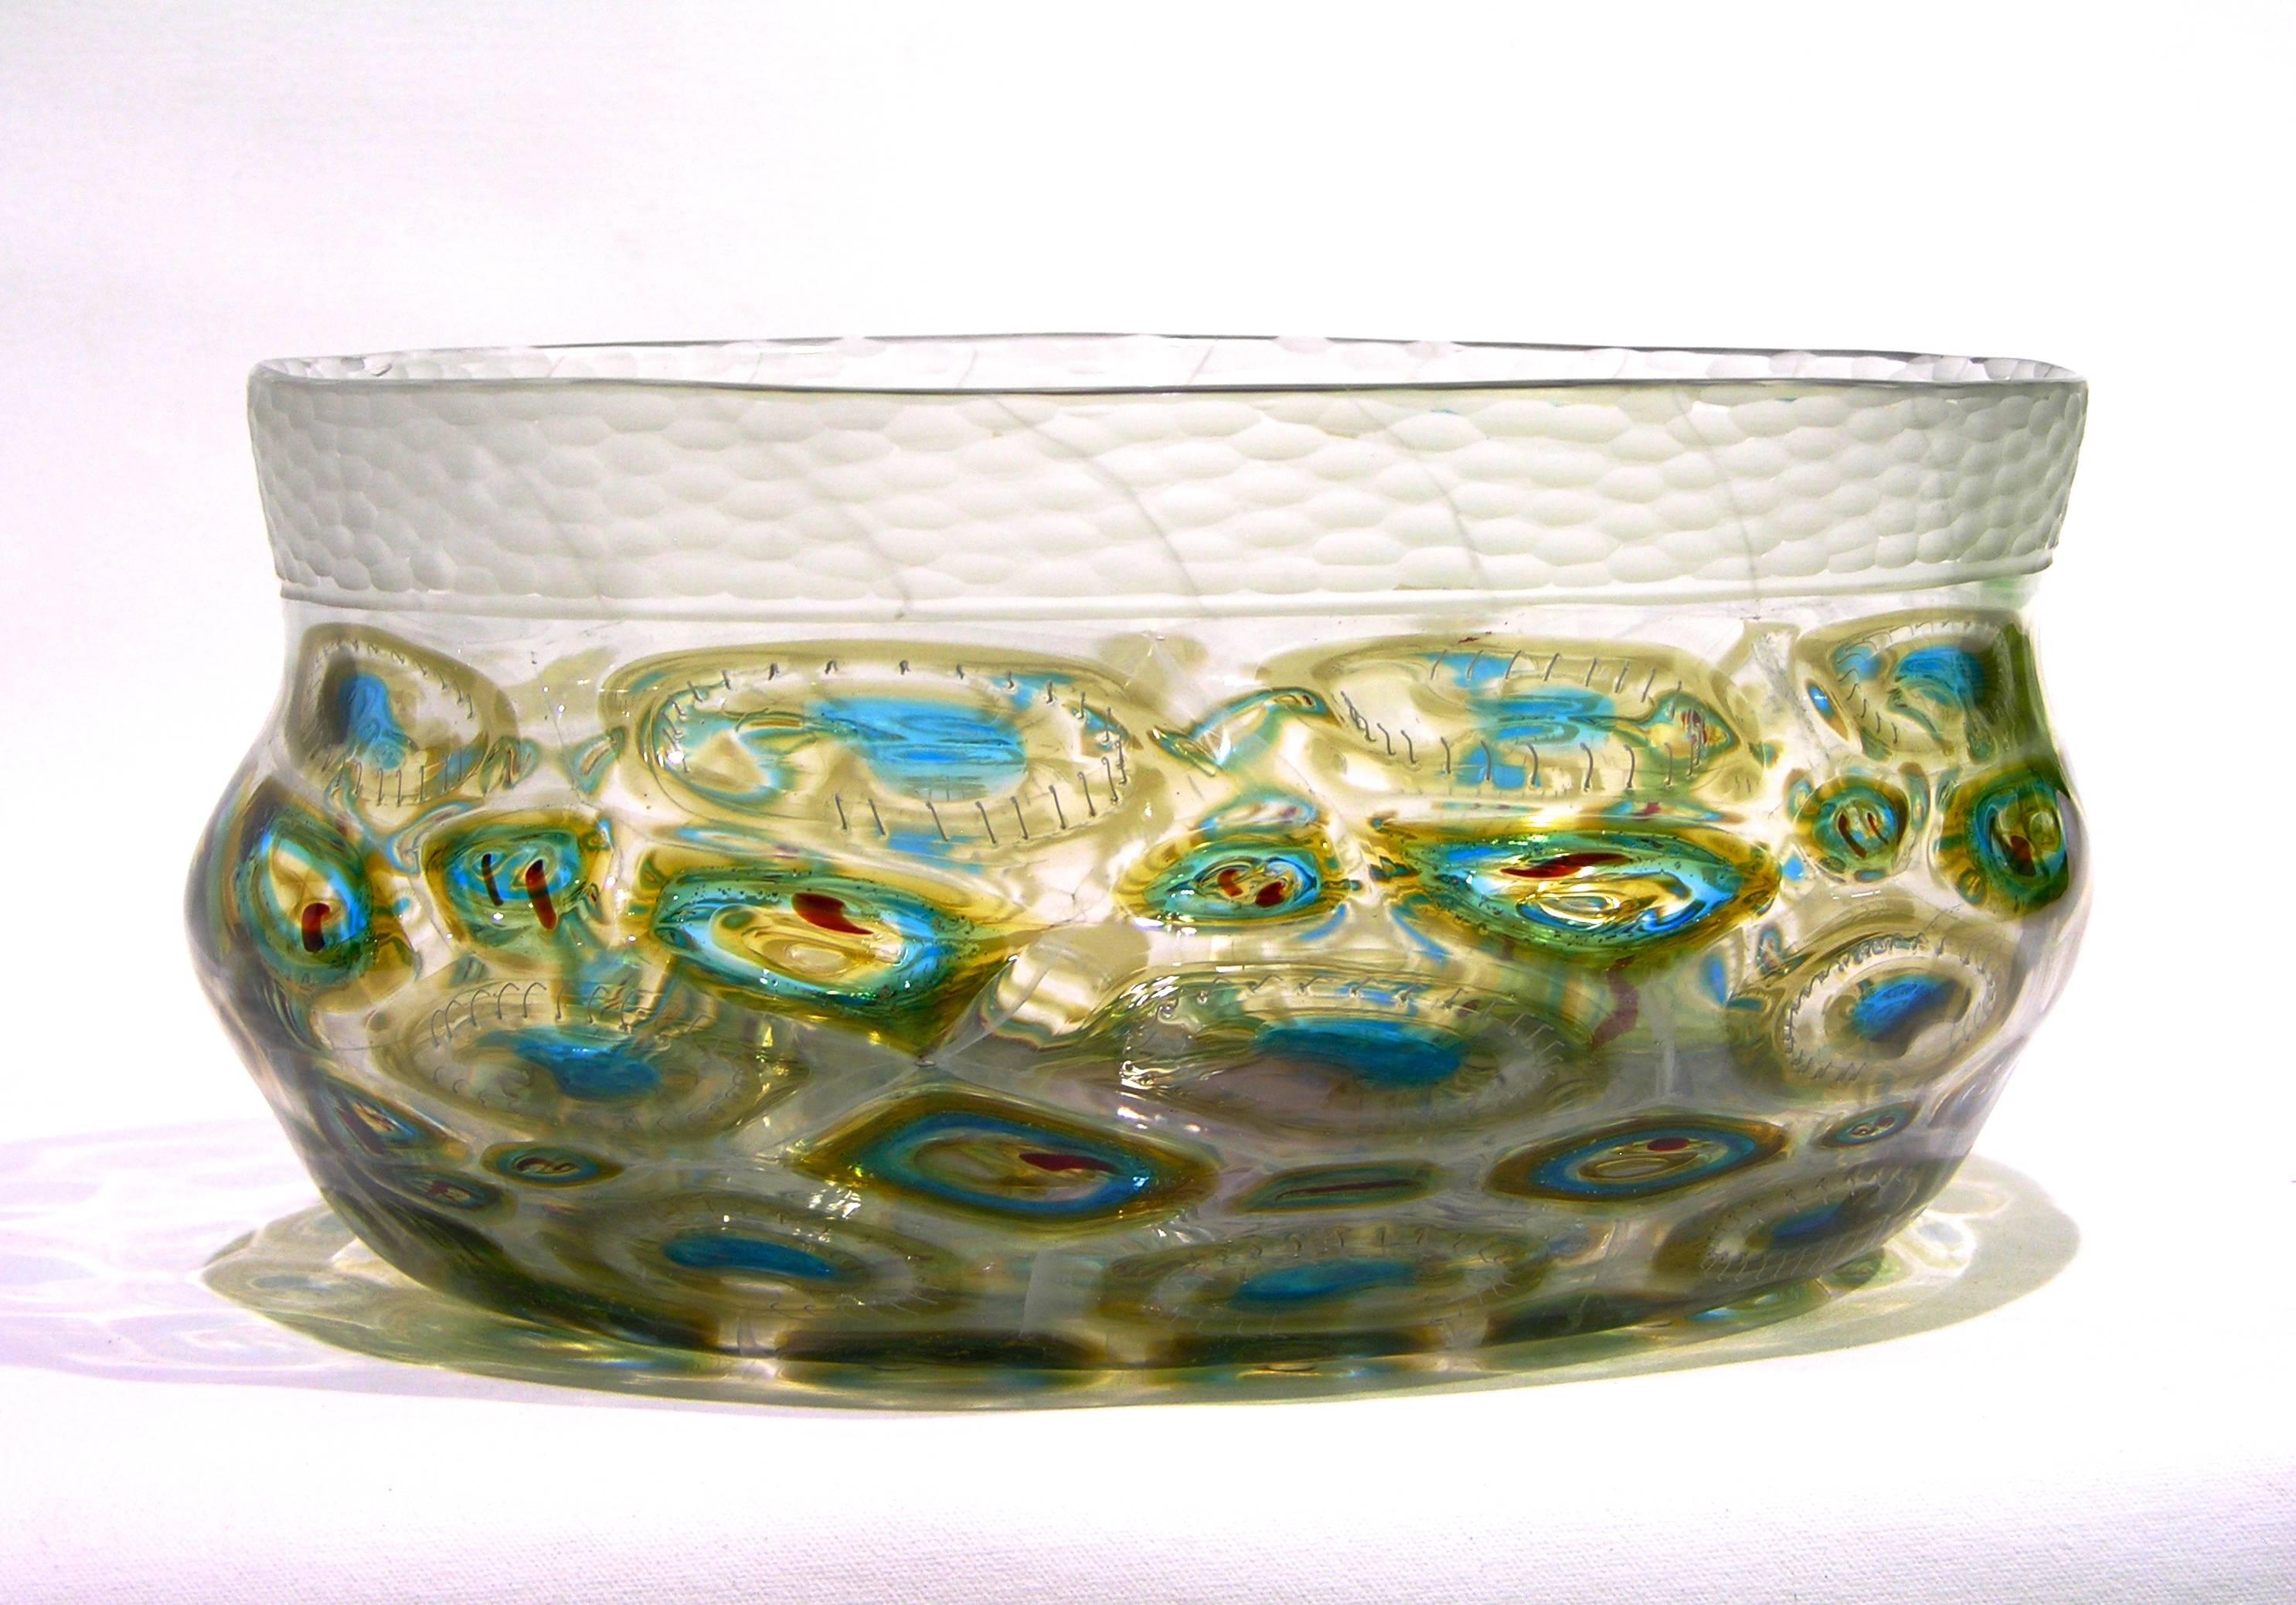 Afro Celotto Art Deco Design Glass Bowl with Peacock Murrine and Silver 4